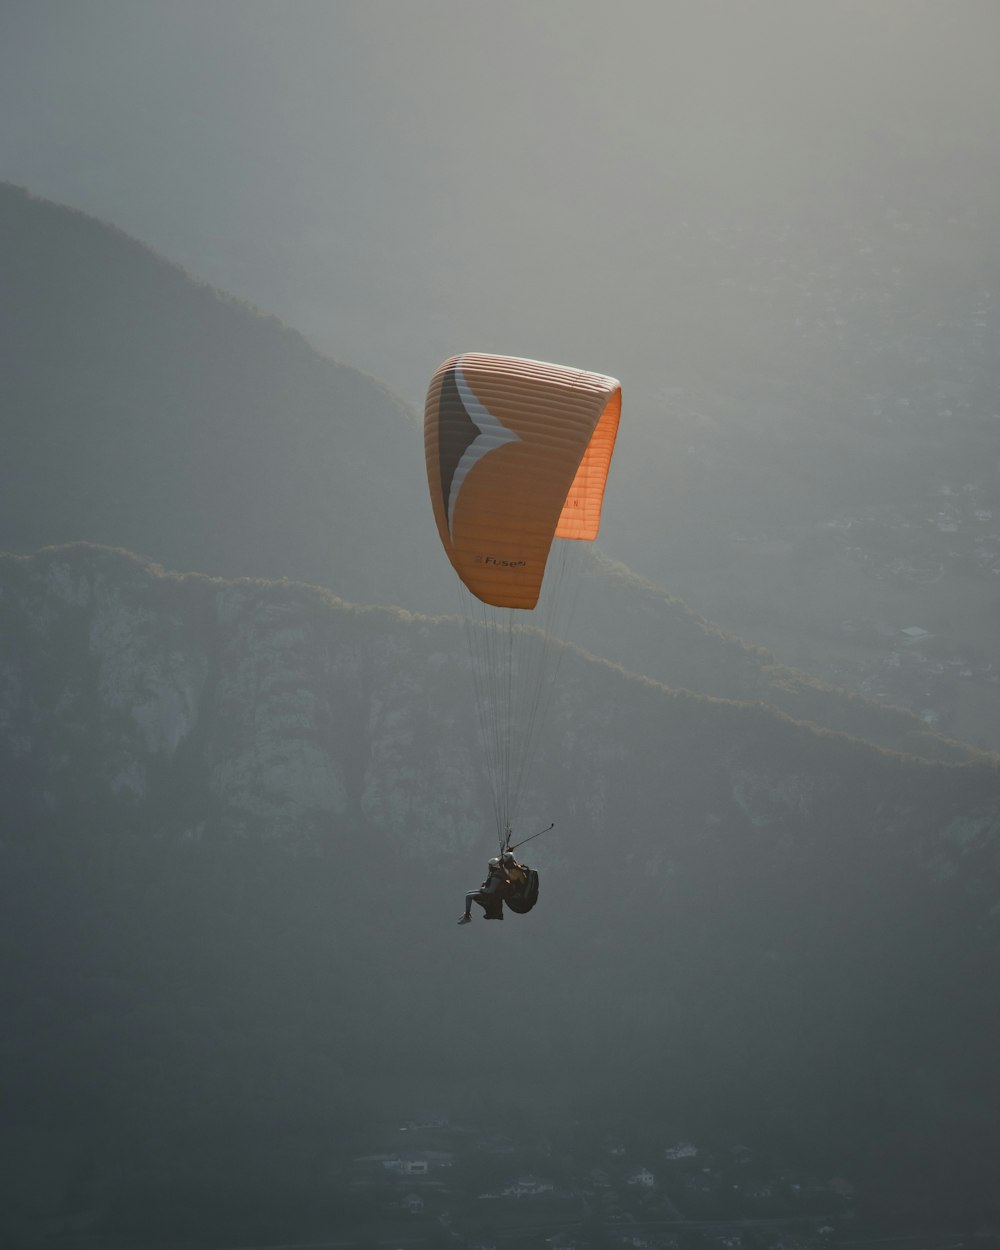 person in orange parachute over white clouds during daytime